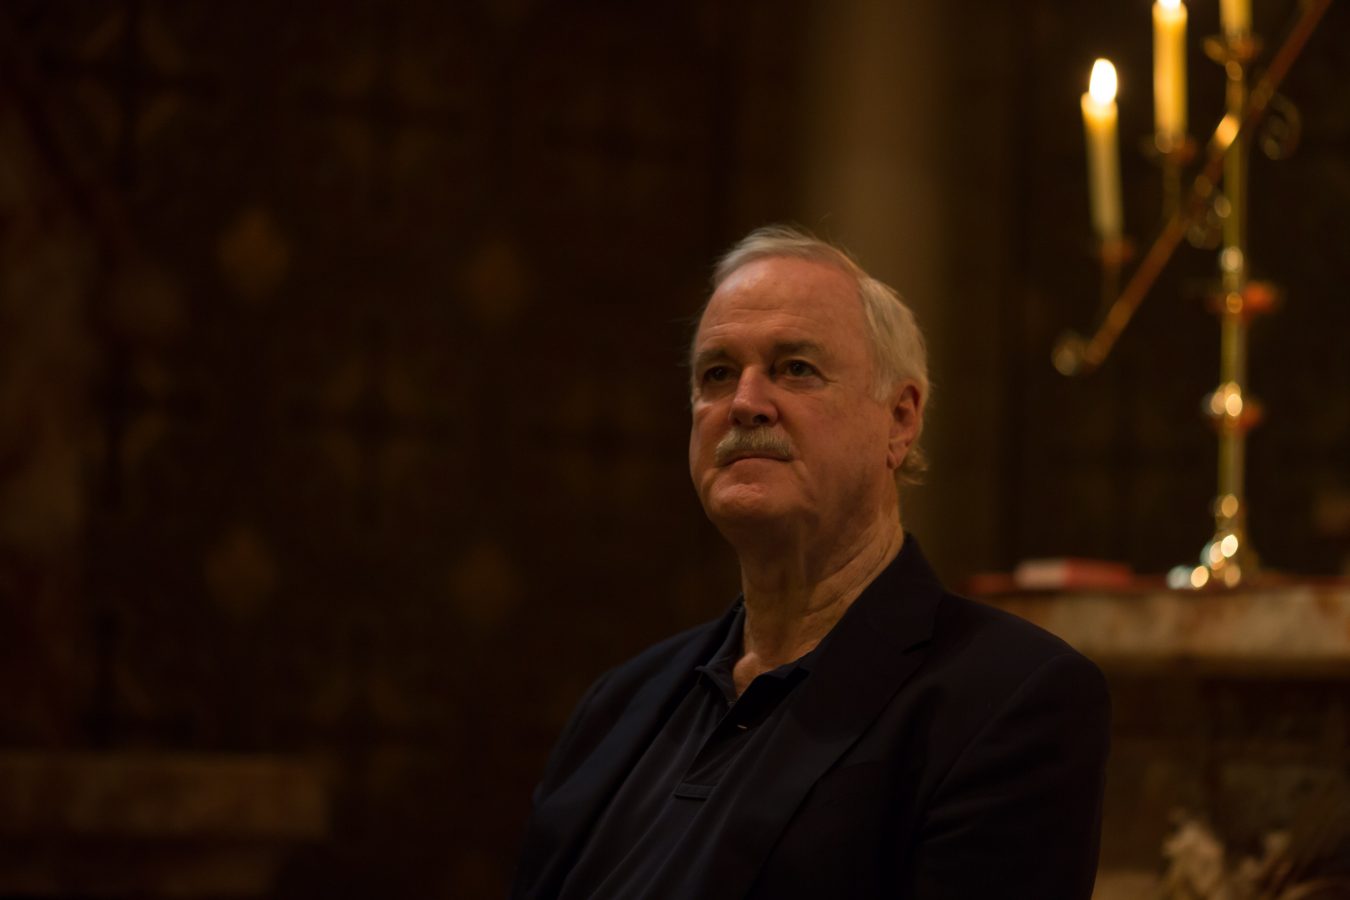 “John Cleese is cancelled” after he claims London is “no longer English”